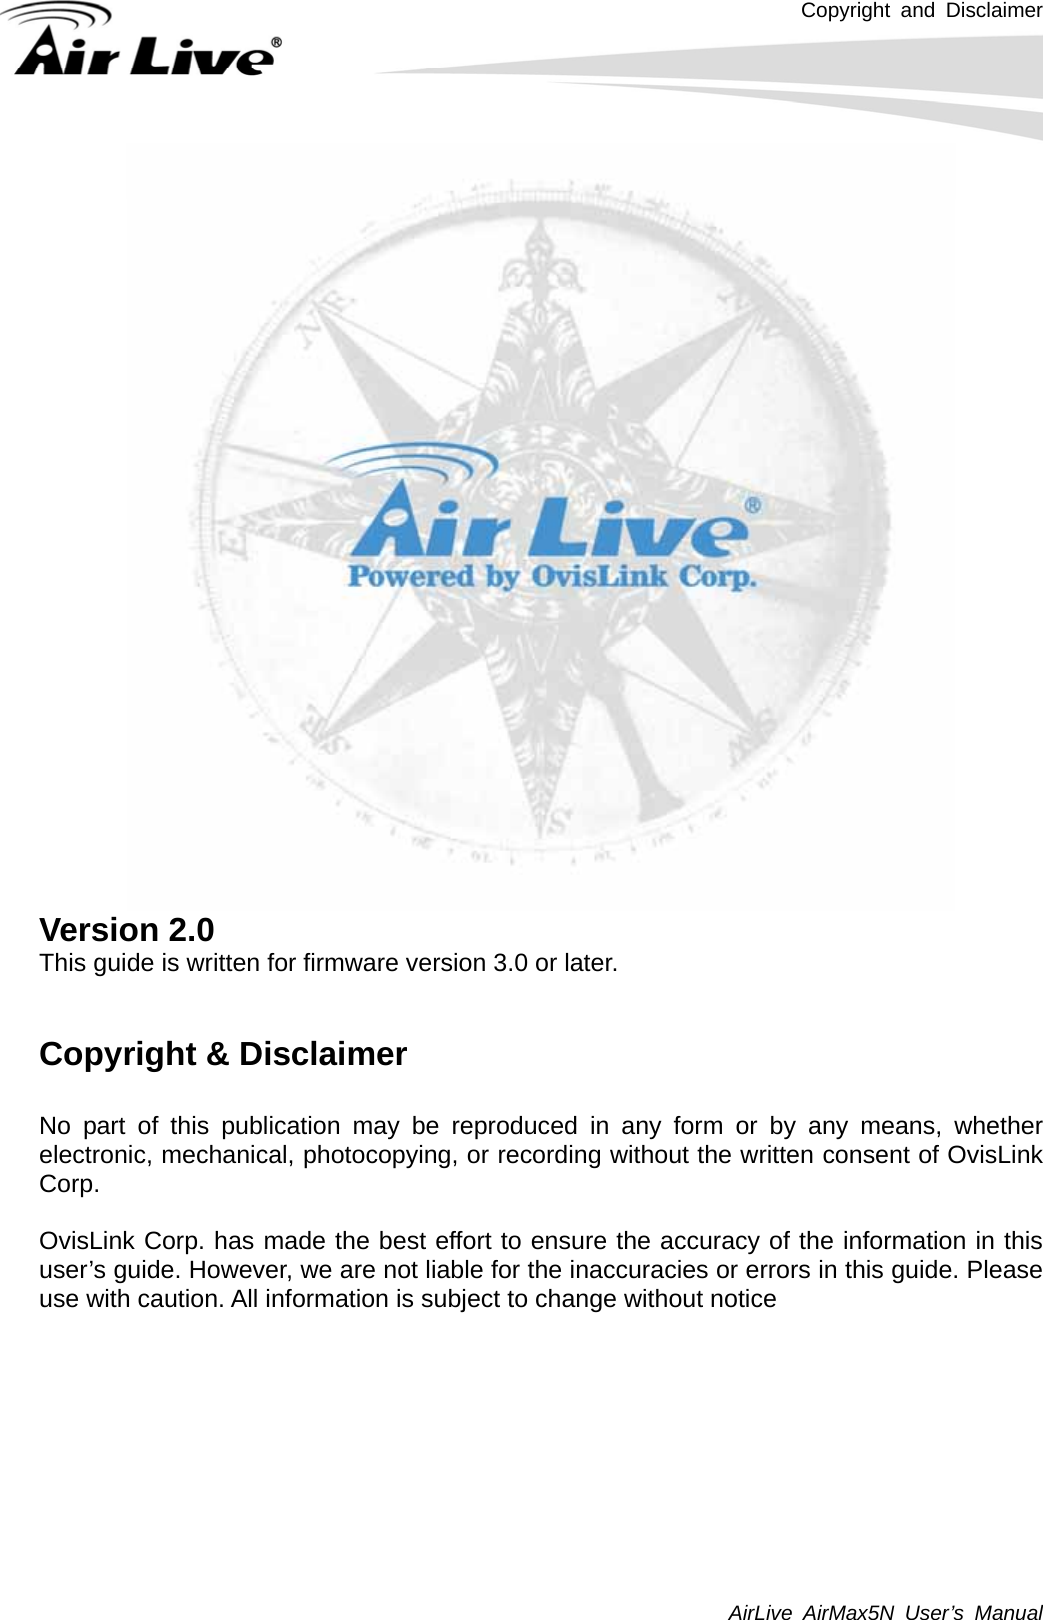 Copyright and Disclaimer AirLive AirMax5N User’s Manual      Version 2.0 This guide is written for firmware version 3.0 or later.   Copyright &amp; Disclaimer  No part of this publication may be reproduced in any form or by any means, whether electronic, mechanical, photocopying, or recording without the written consent of OvisLink Corp.   OvisLink Corp. has made the best effort to ensure the accuracy of the information in this user’s guide. However, we are not liable for the inaccuracies or errors in this guide. Please use with caution. All information is subject to change without notice          